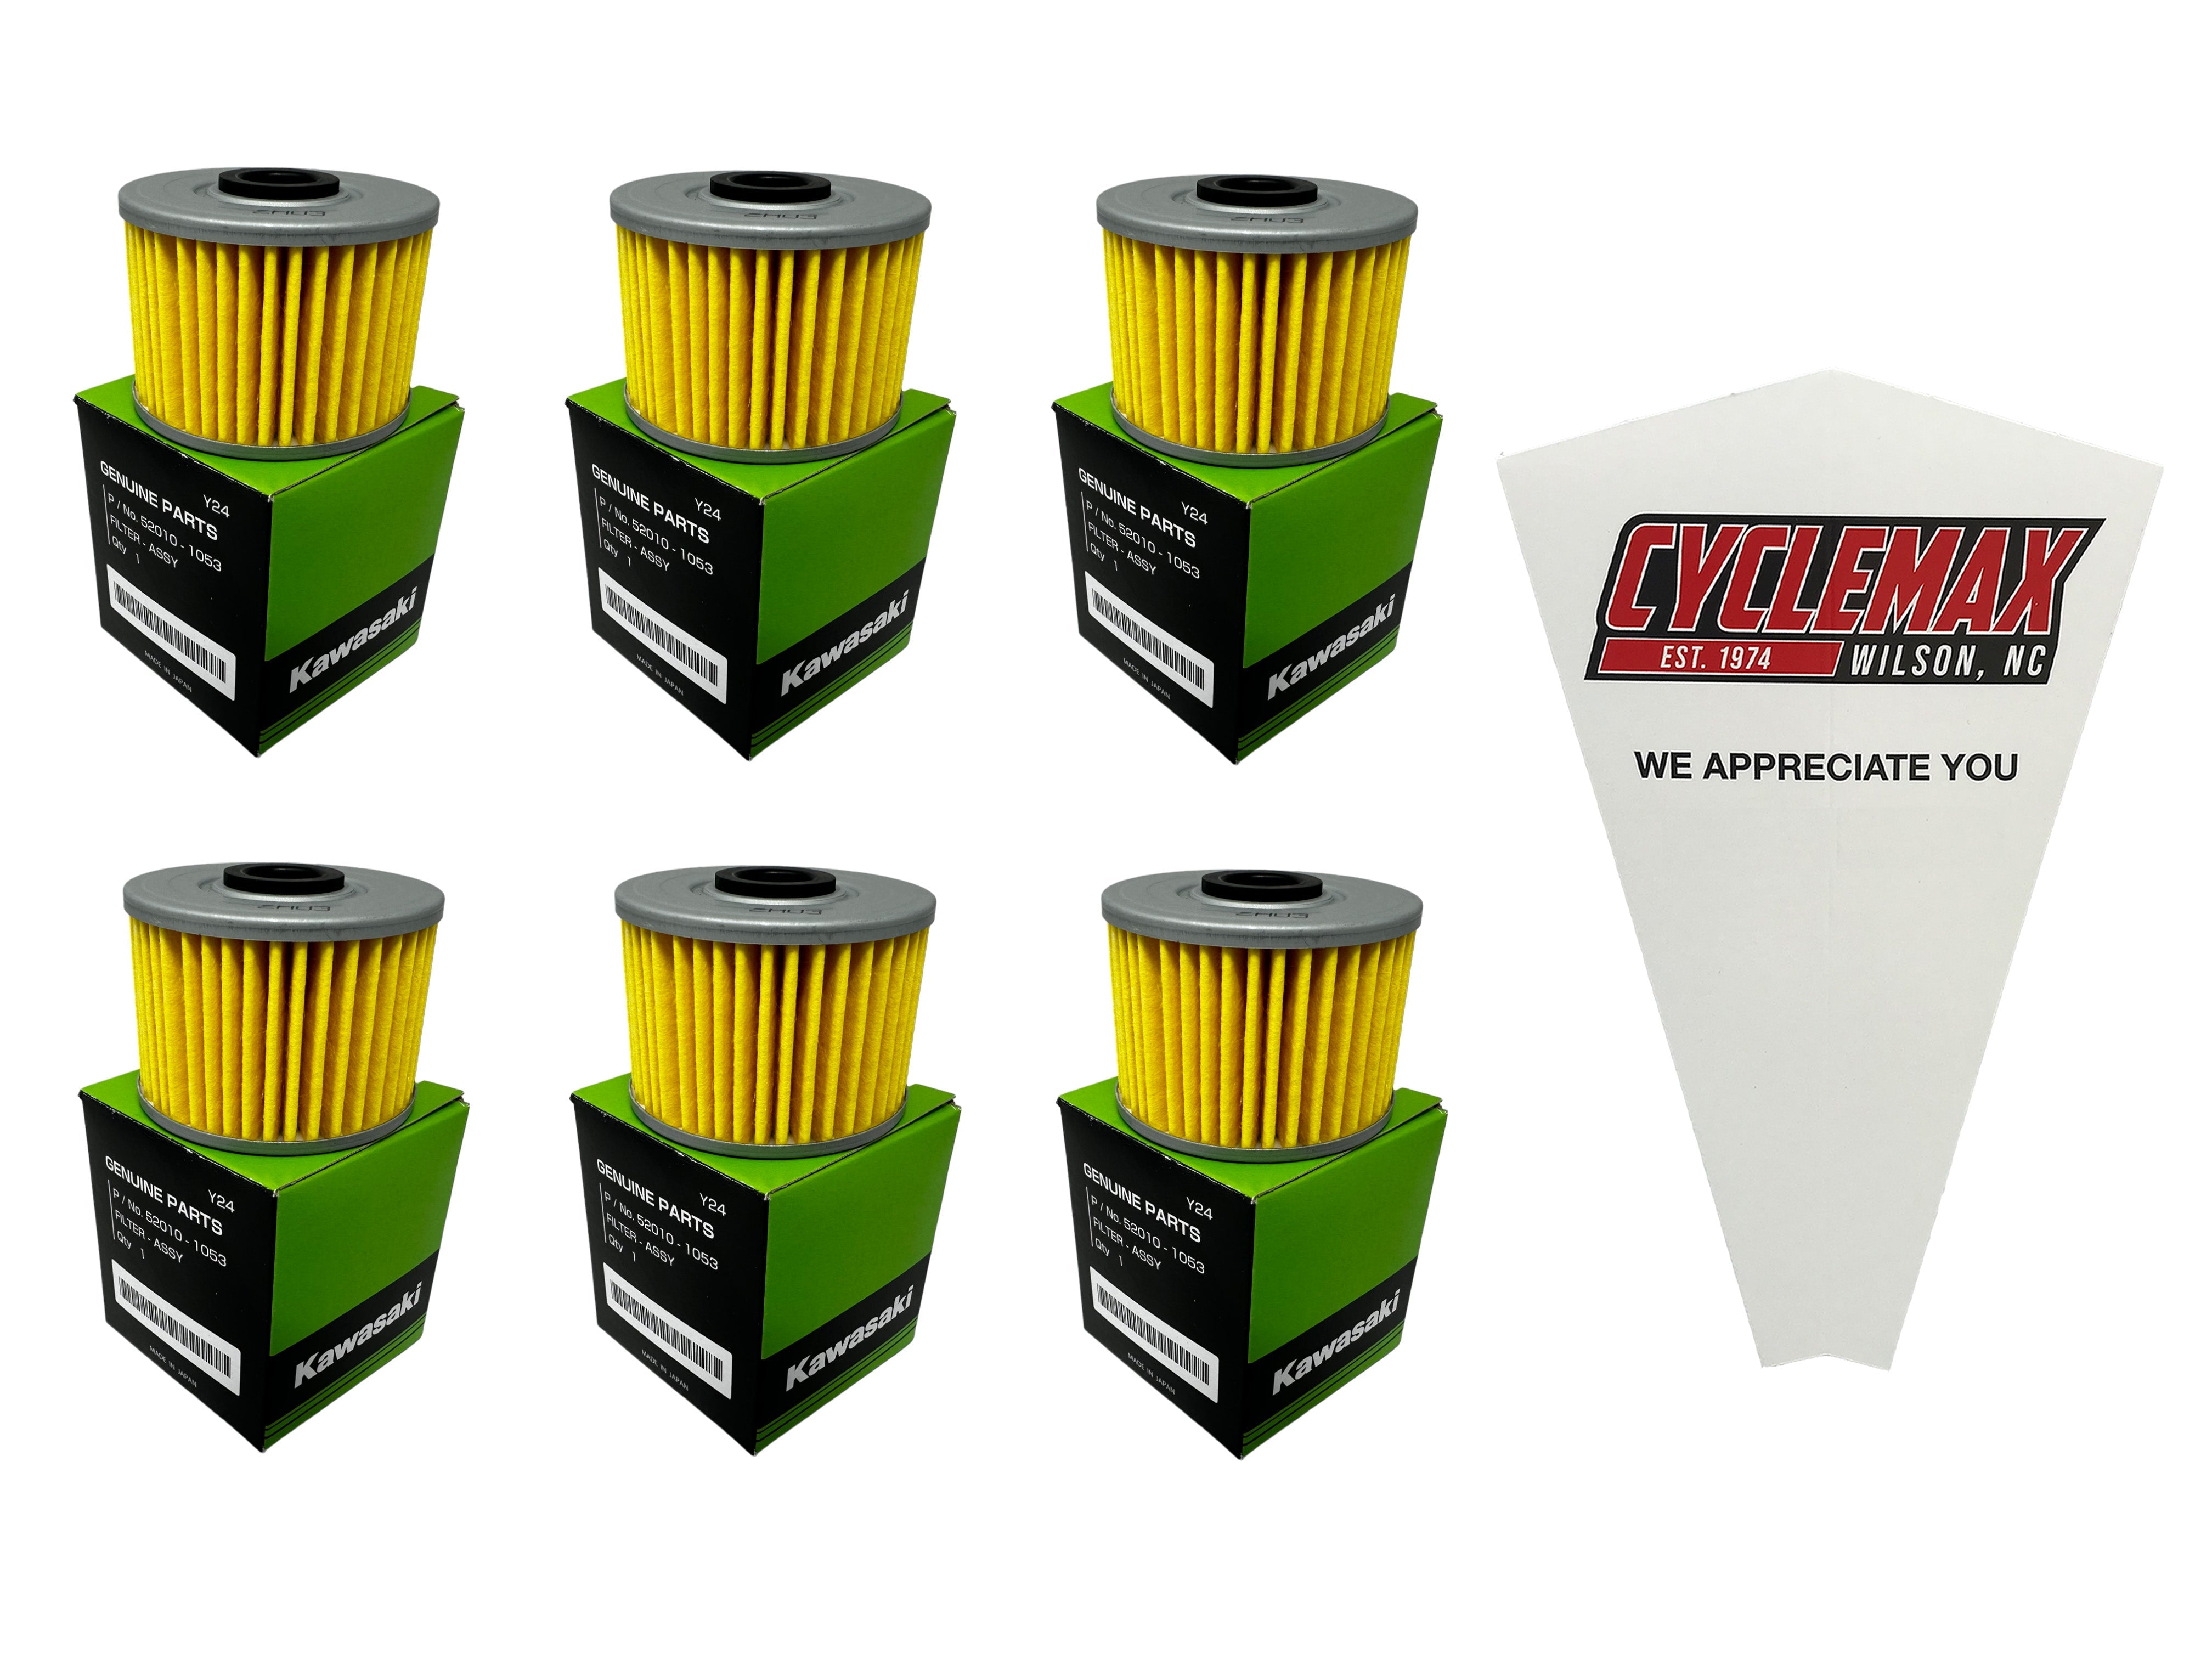 Cyclemax Six Pack for Kawasaki Oil Filter 52010-1053 Contains Six Filters and a Funnel